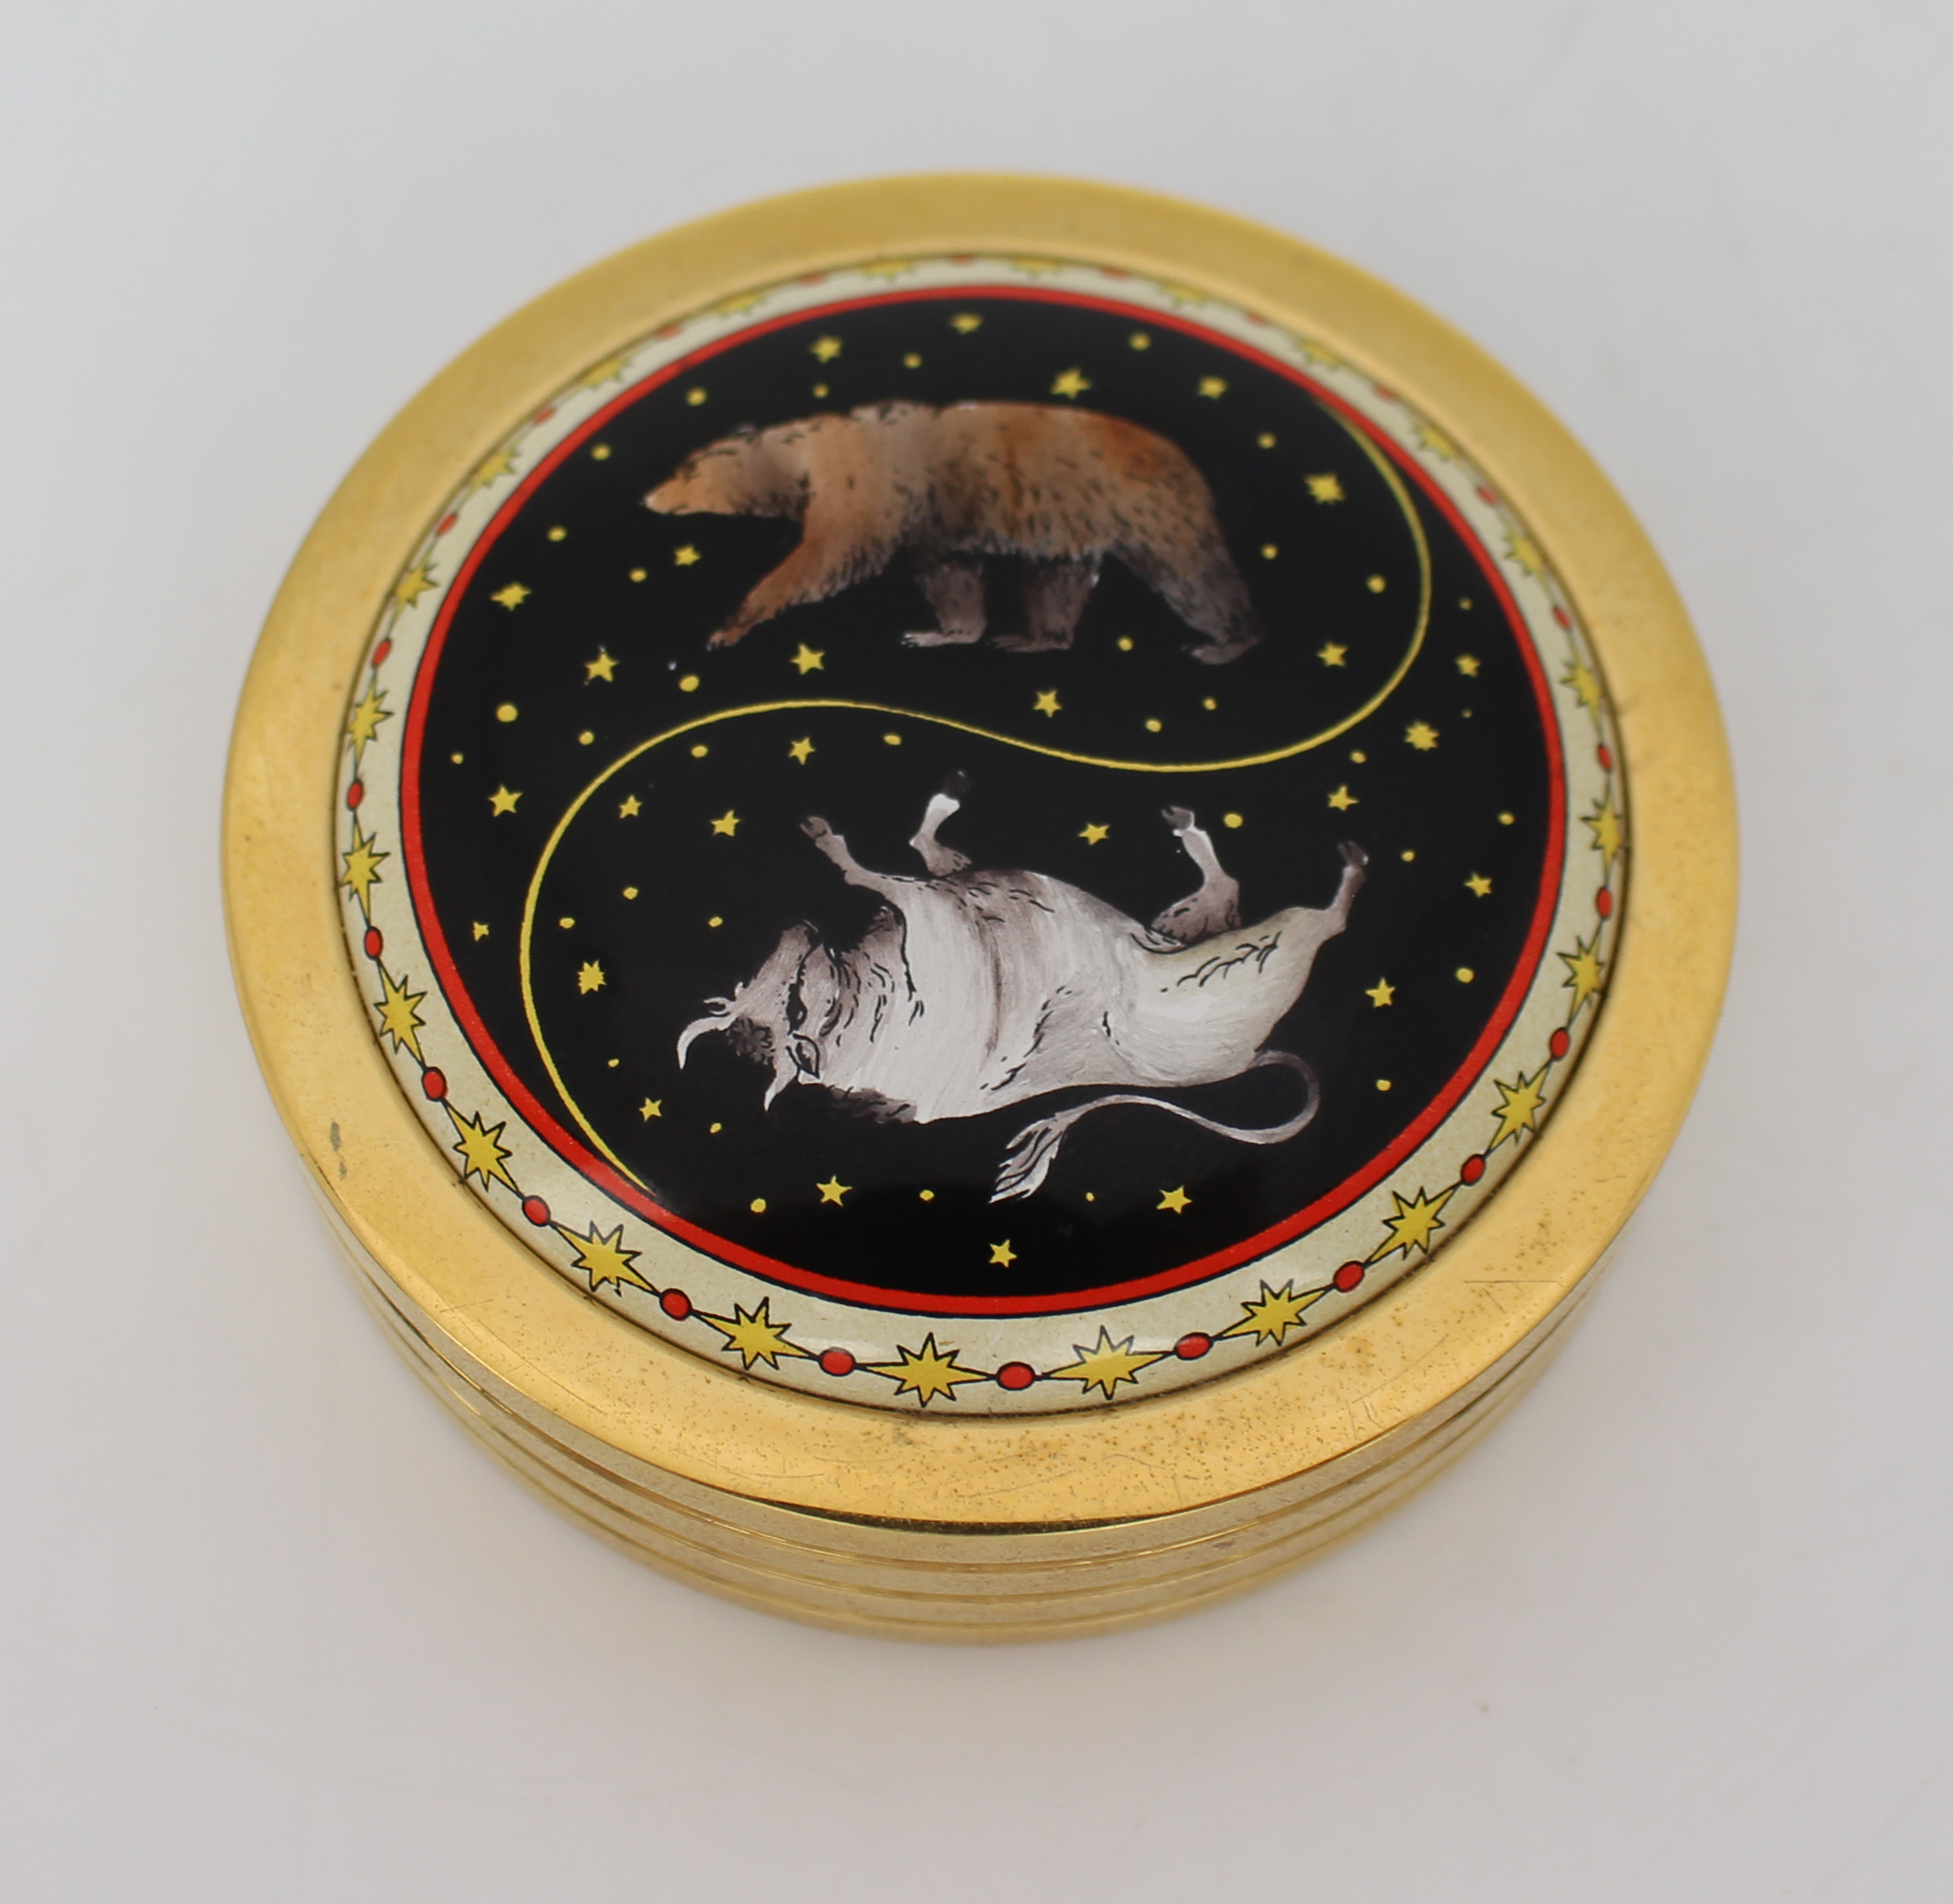 Halcyon Days Enamel Paperweight - Image 3 of 3